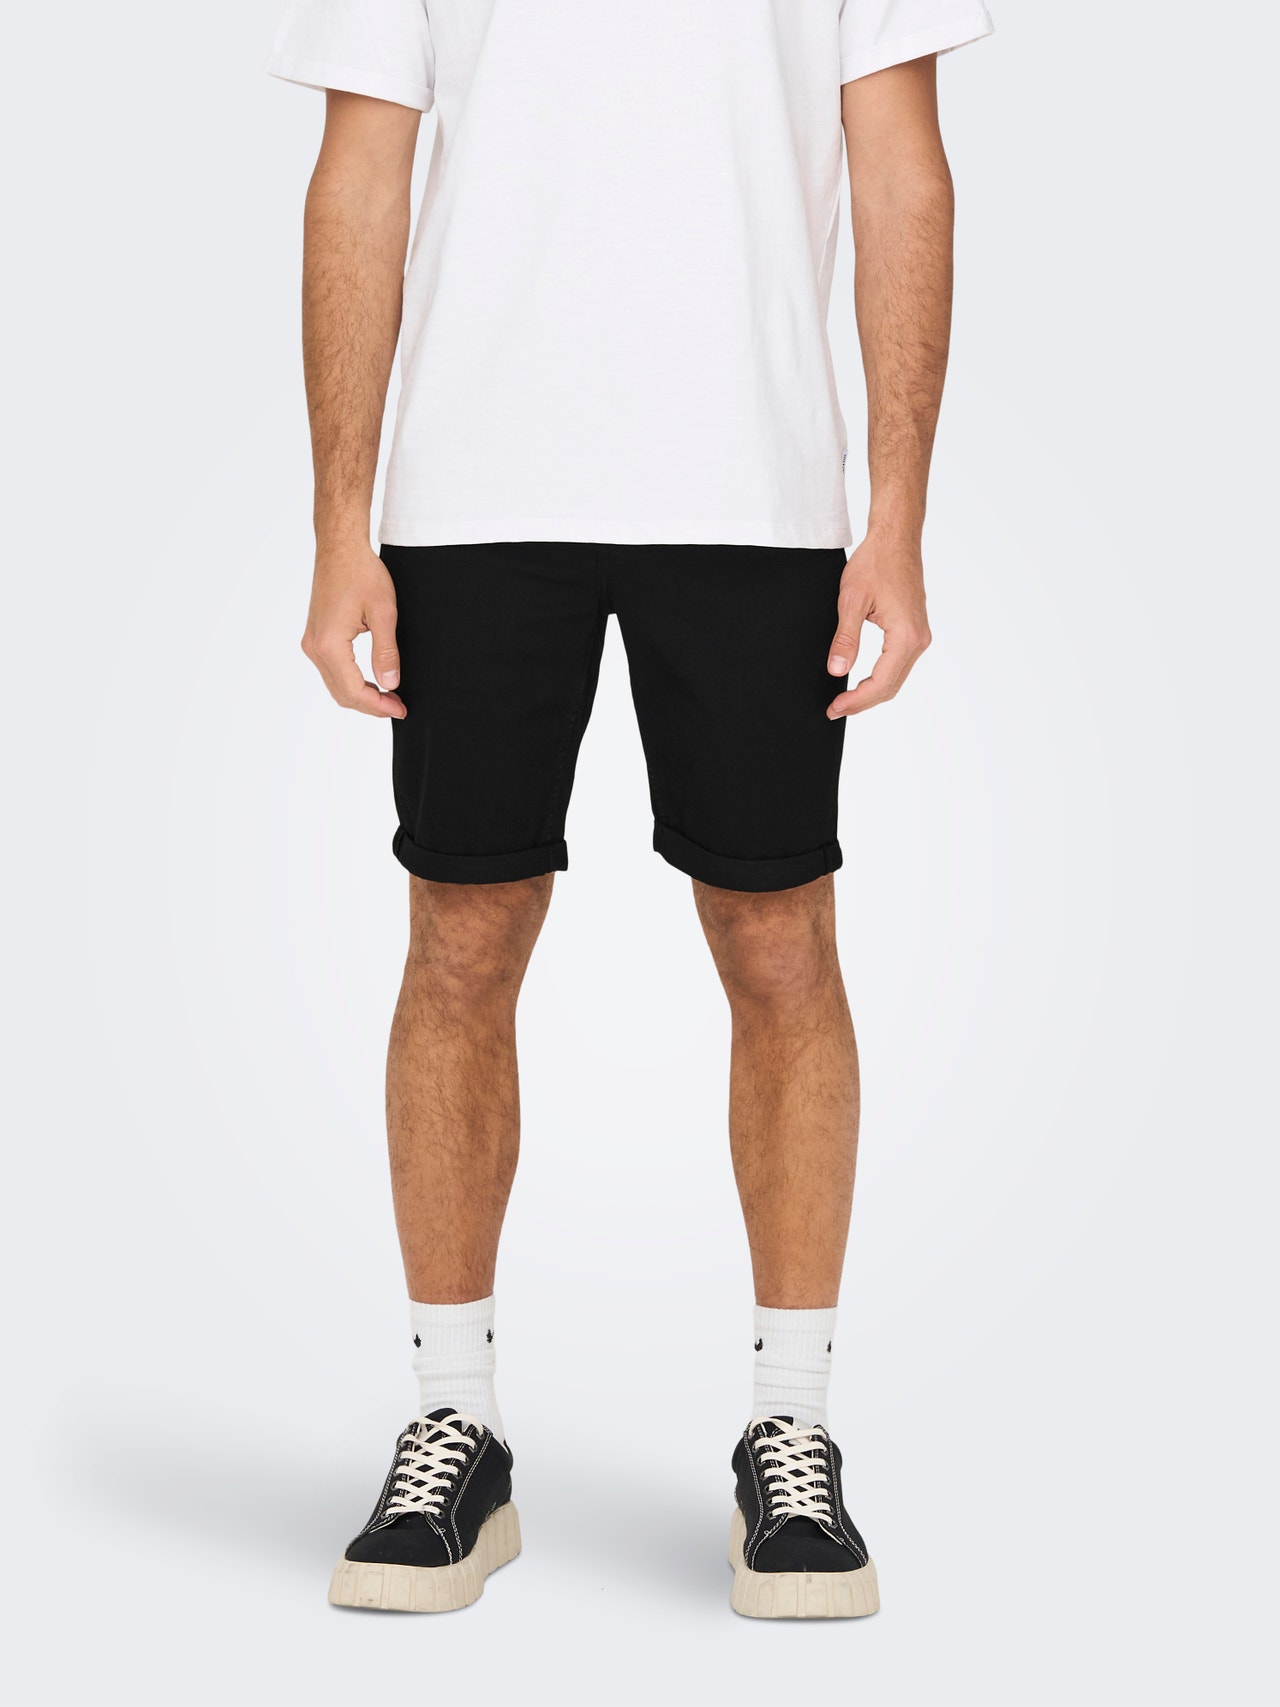 ONLY & SONS onsply denim shorts fold up ext box -Black - 22026618